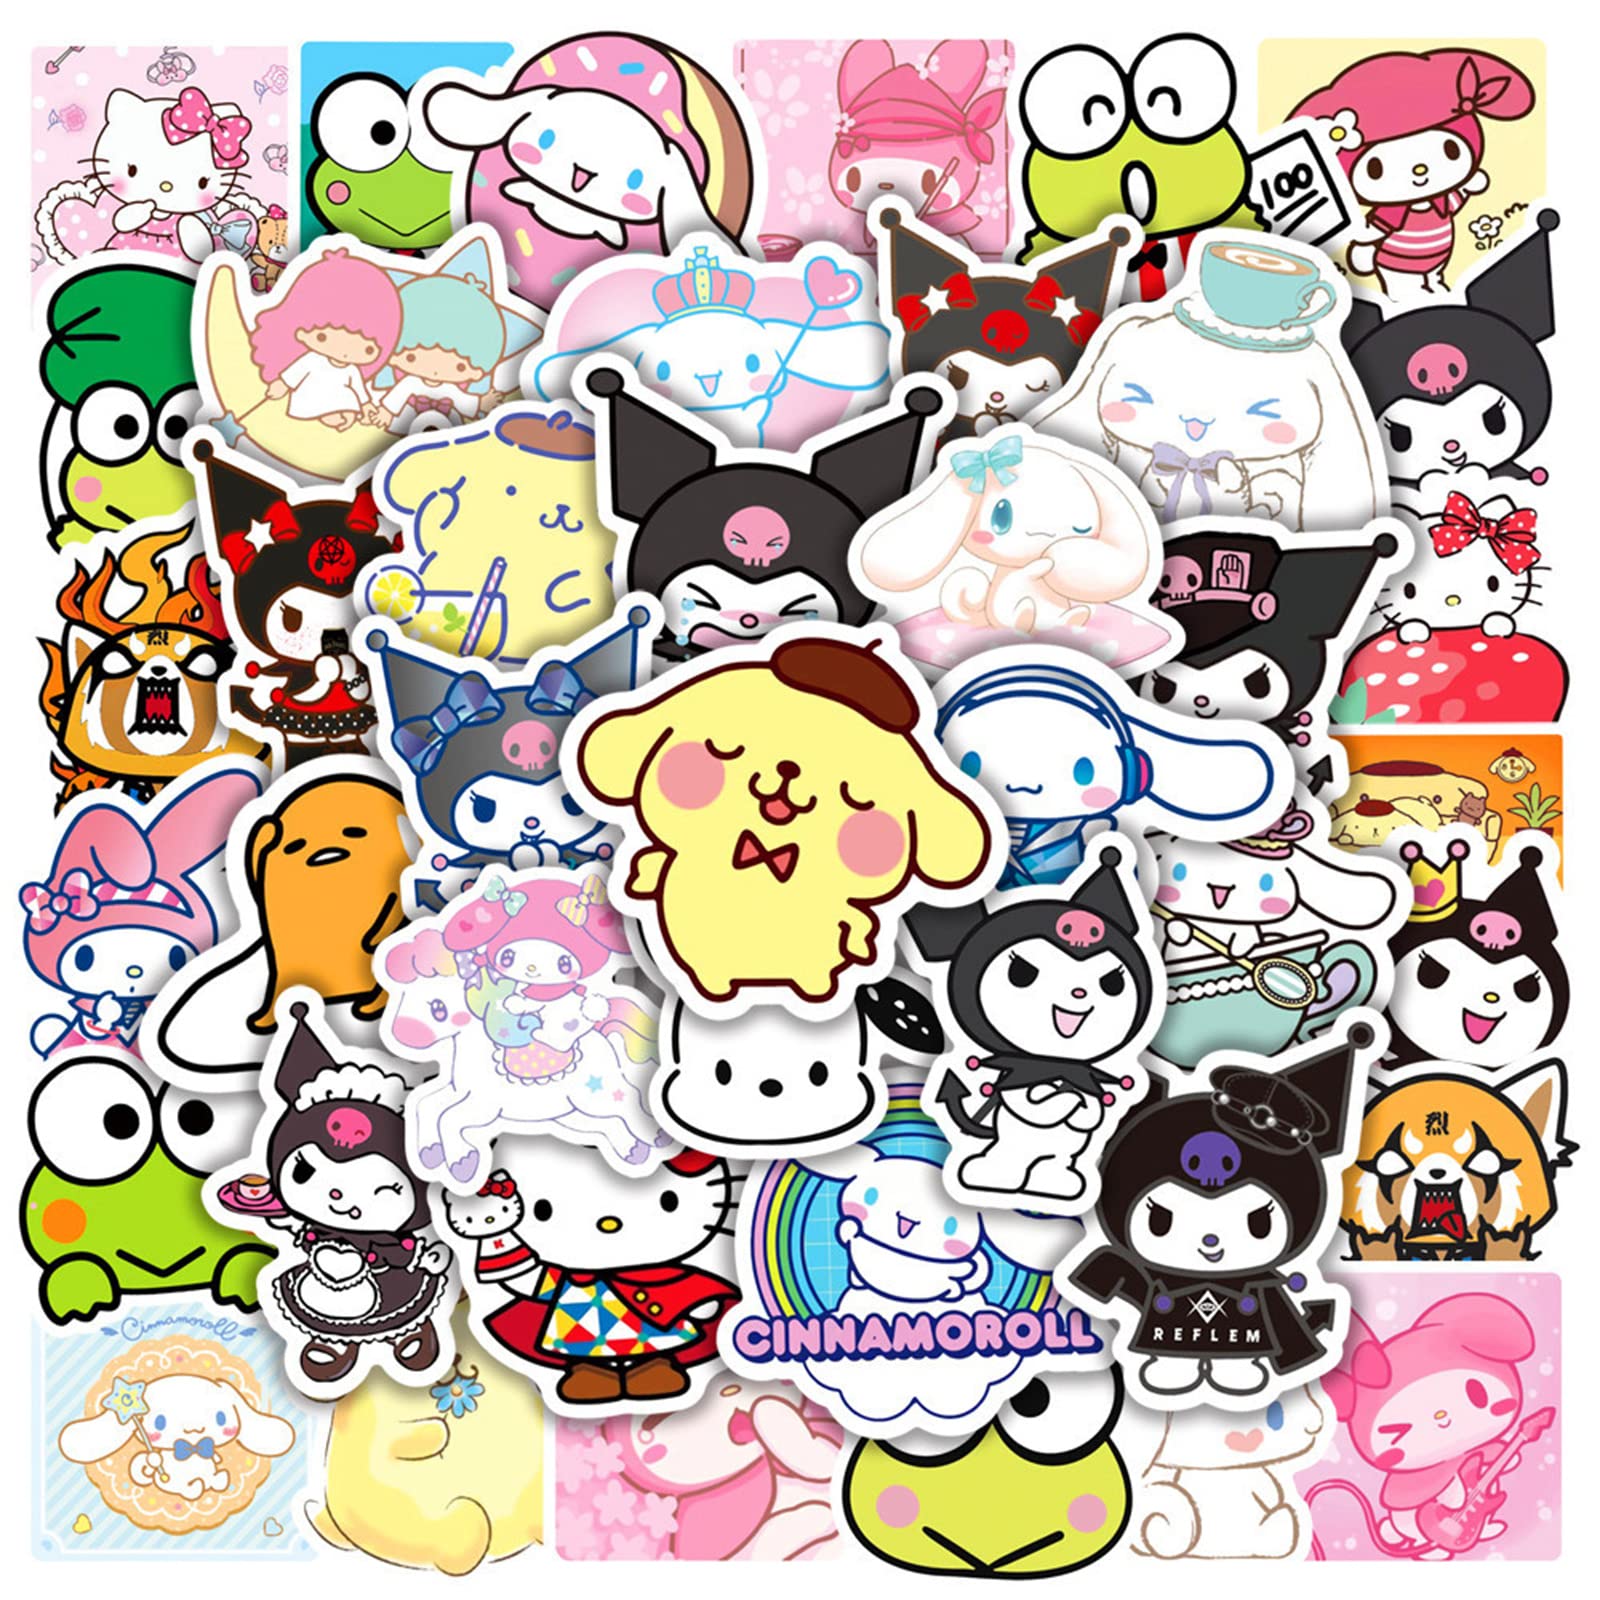 A collection of stickers with various characters - Cinnamoroll, Keroppi